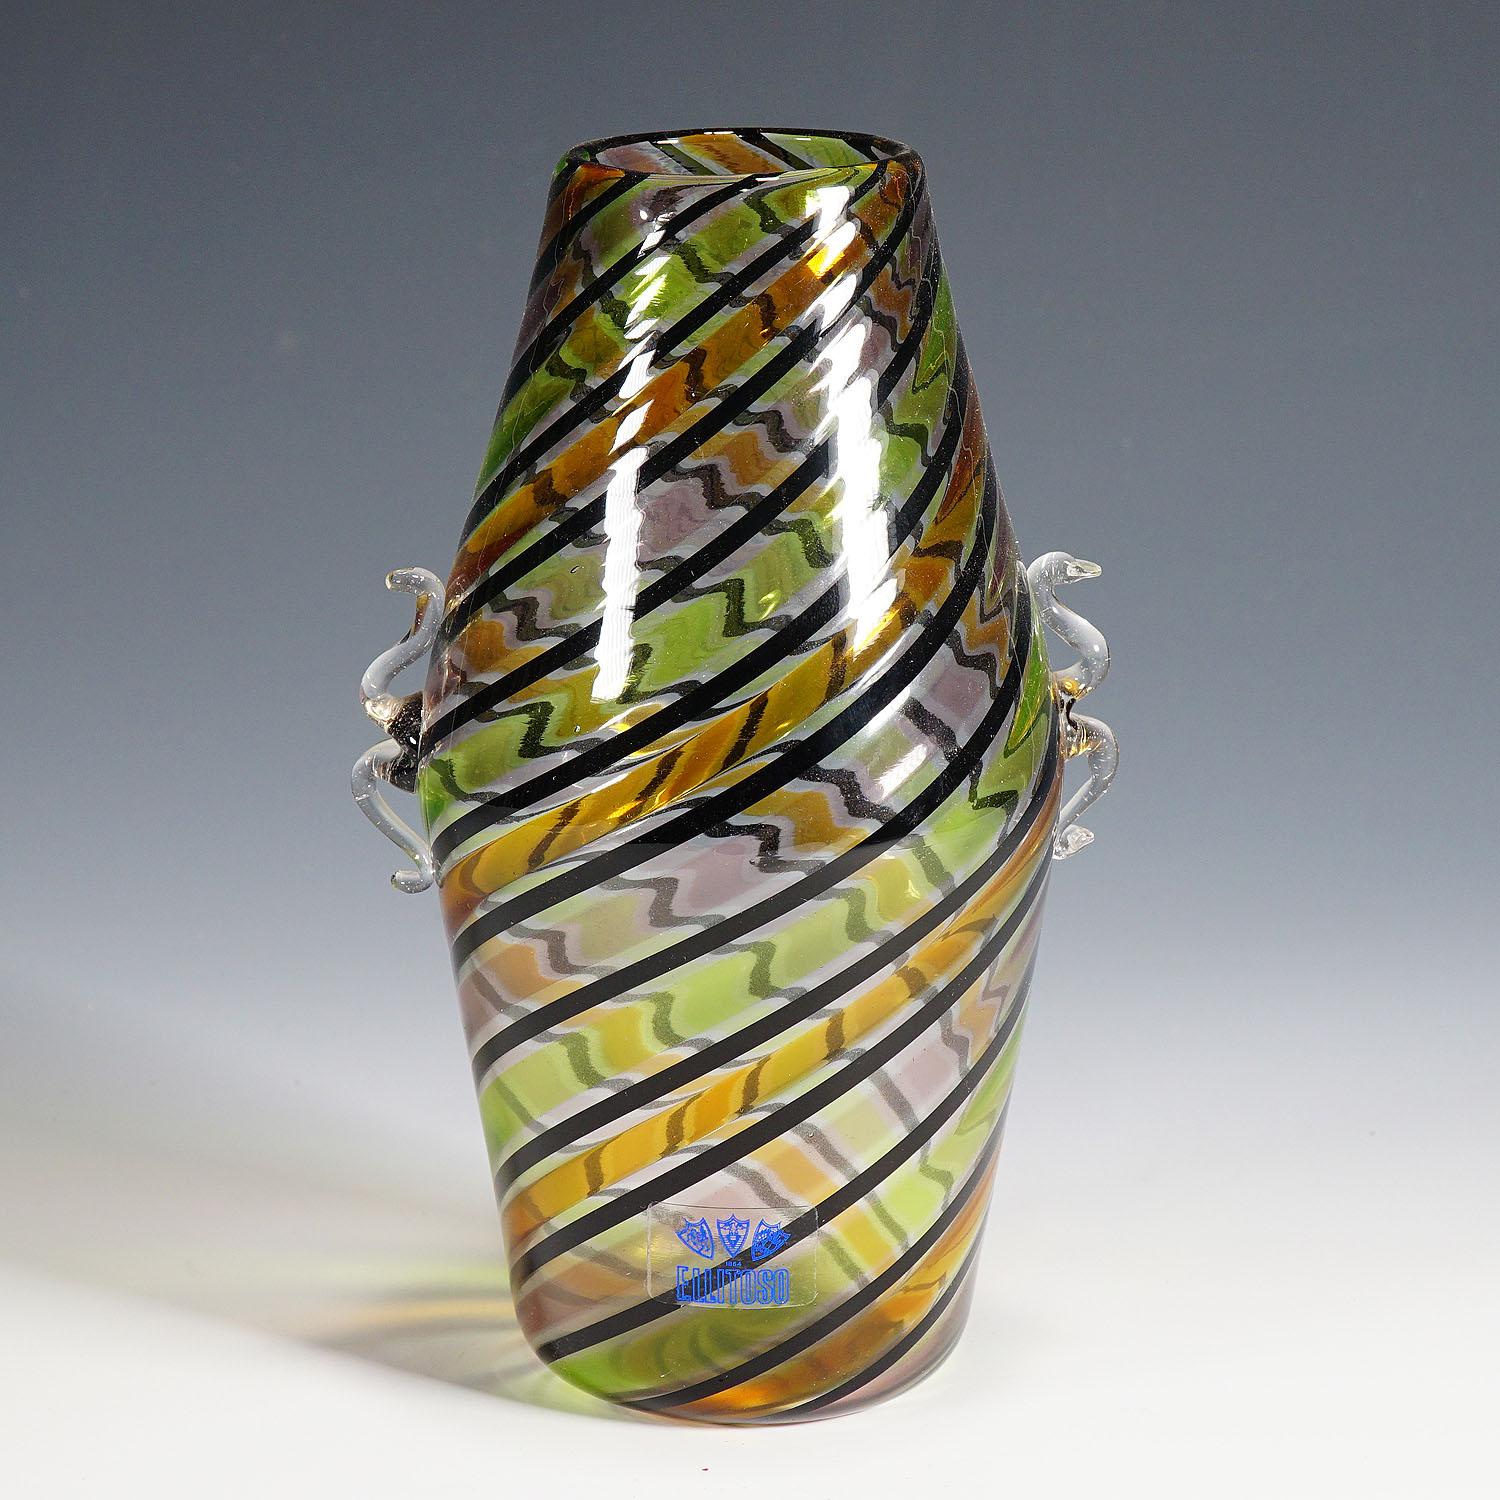 A Fratelli toso a canne glass vase manufactured ca. 1965. Made by hot fusion of multicoloured glass sticks. The company lable is on the body.

Measures:
Width: 4.72